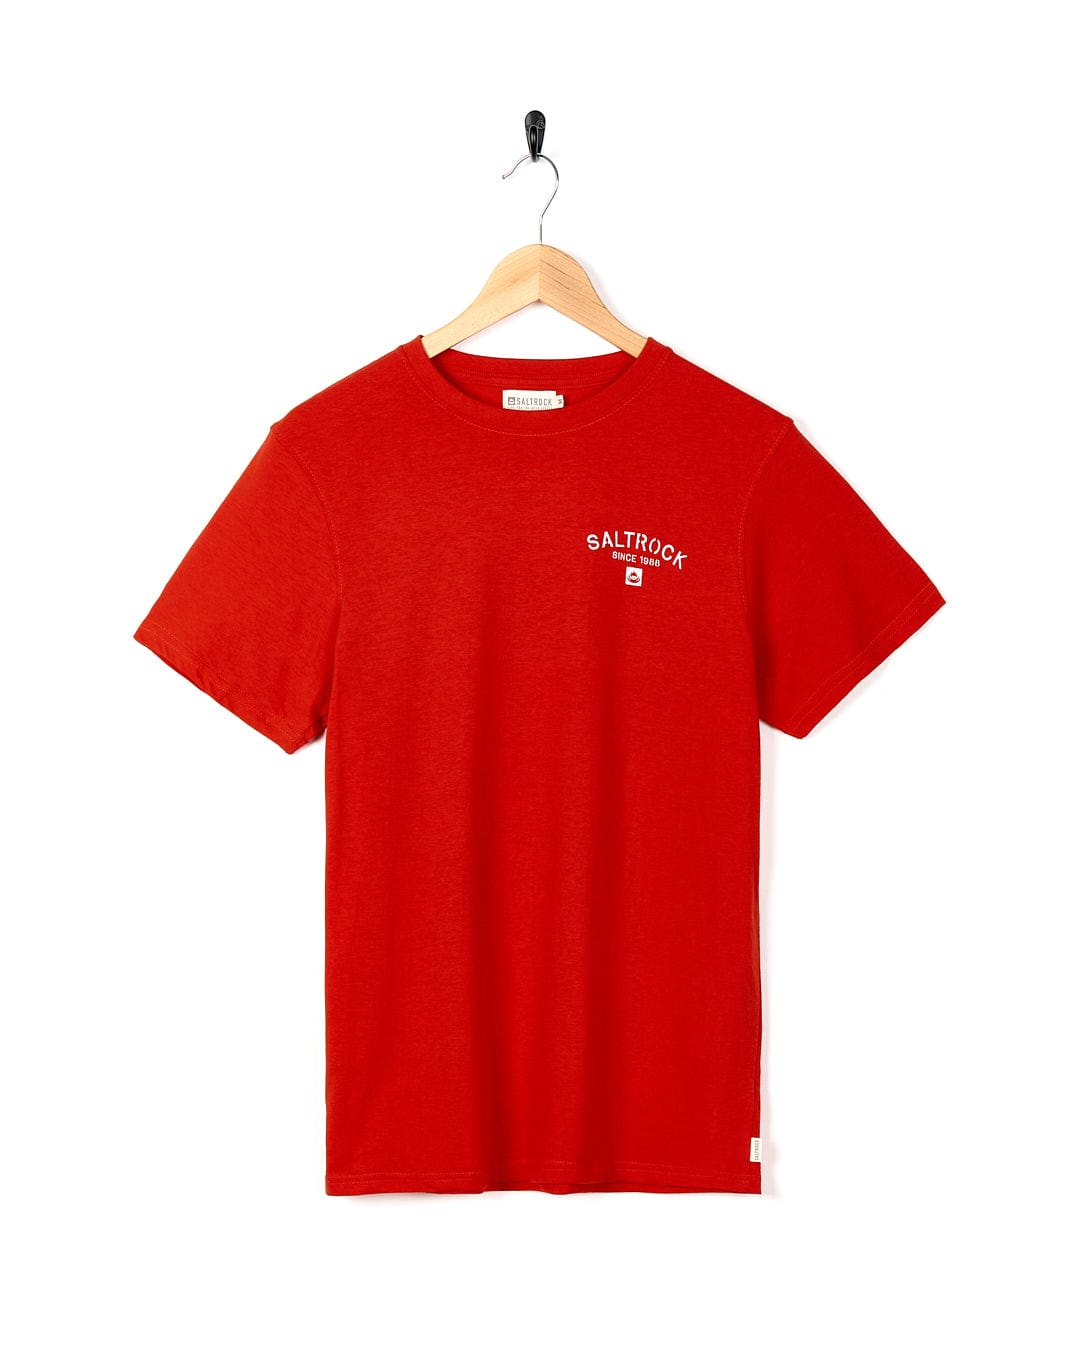 A Saltrock Stencil - Mens Newquay Location T-Shirt - Red with a white logo on it.